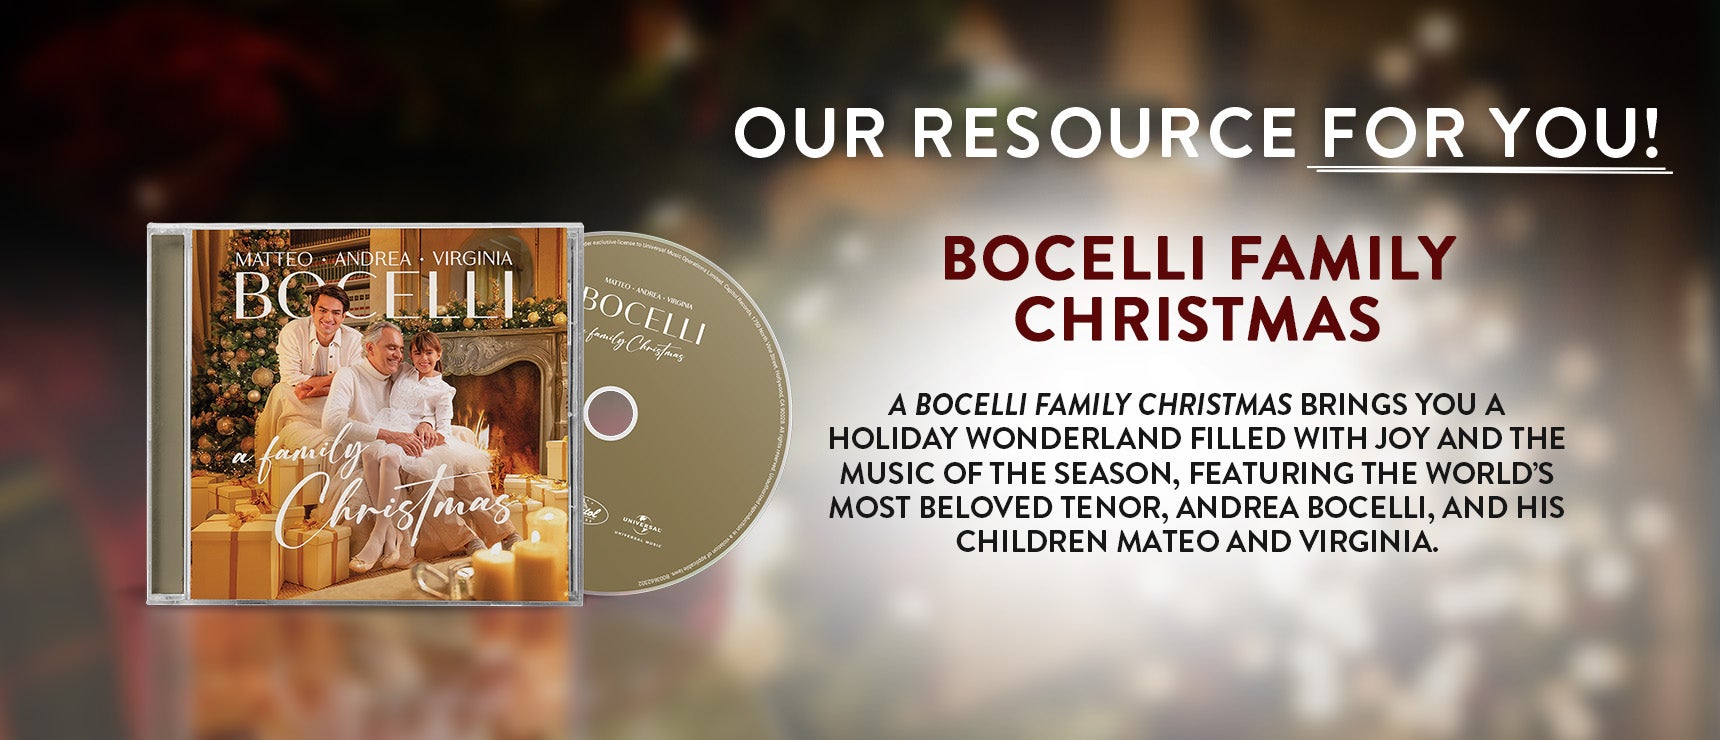 Bocelli: A Family Christmas by Andrea Bocelli on TBN